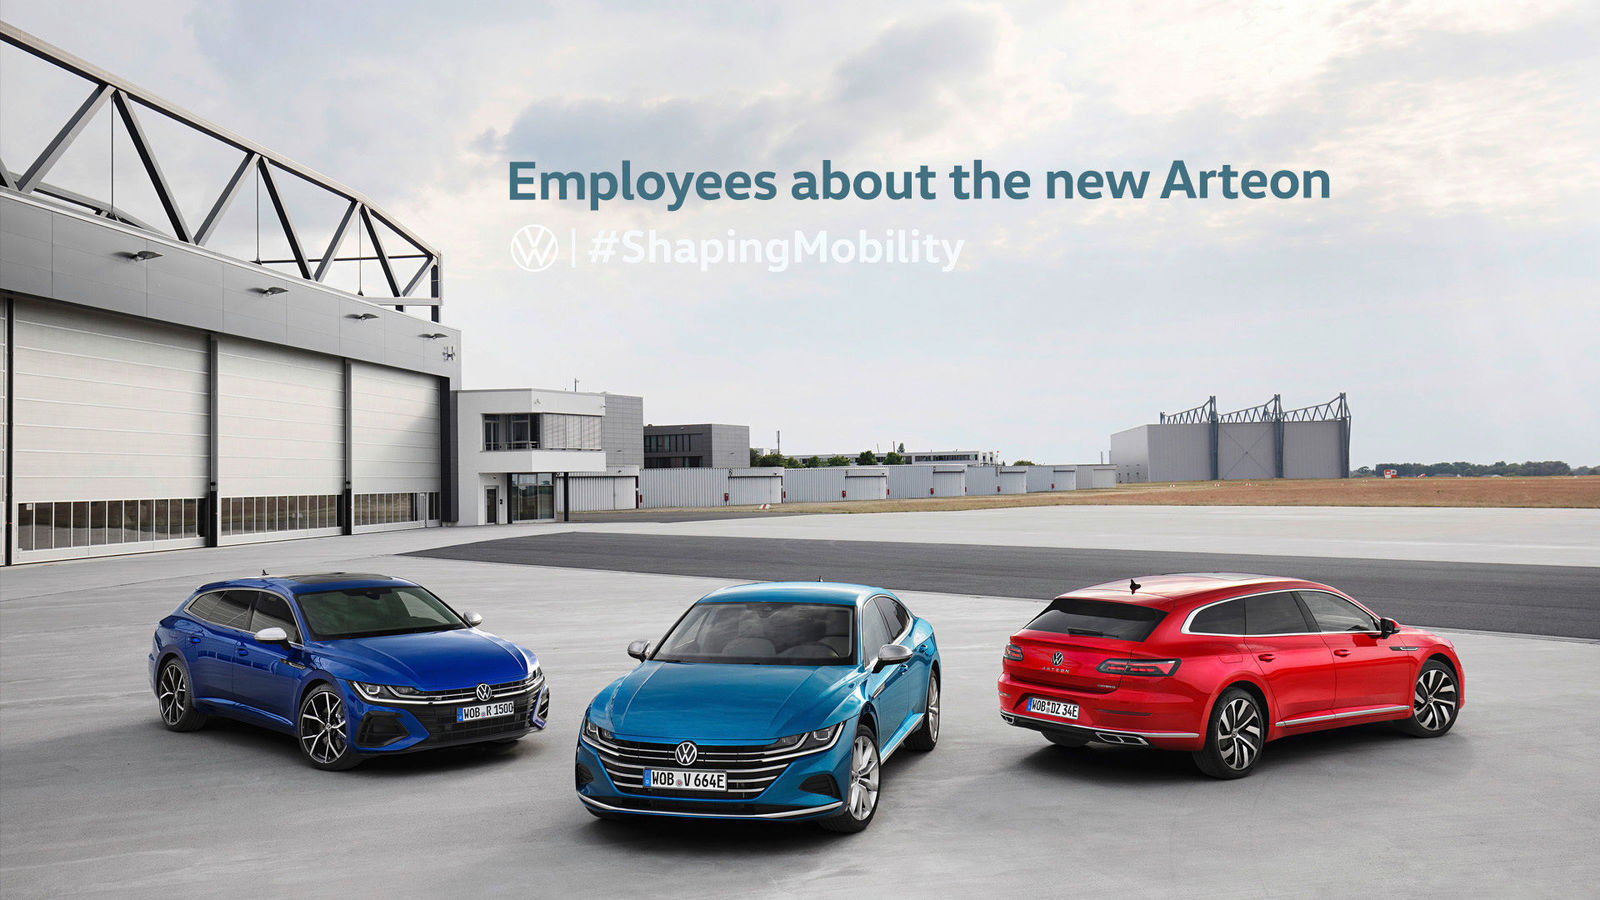 YouTube/Download-Link: „The new Arteon - Employee messages | #ShapingMobility“